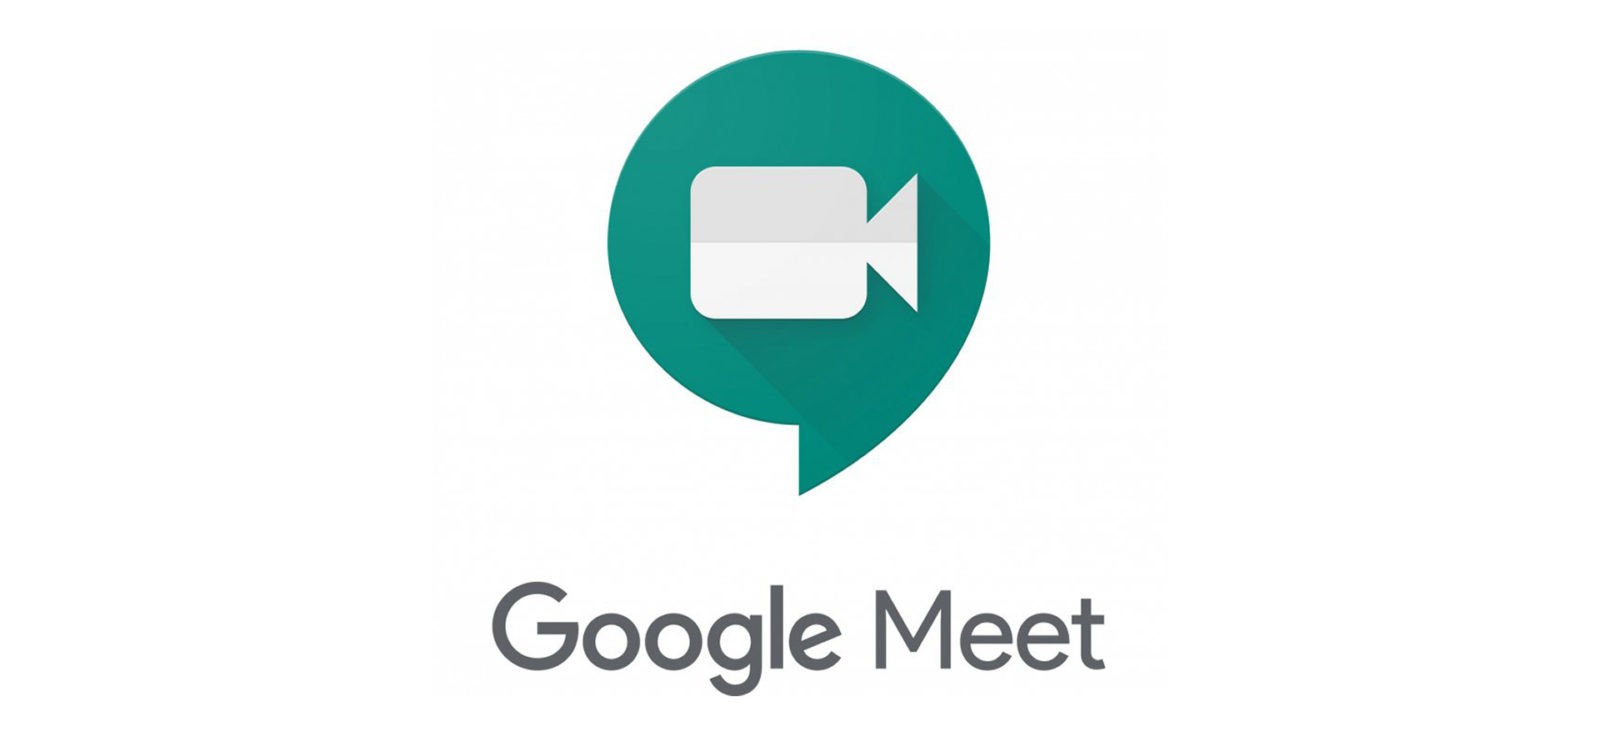 Google Meet Free Users Can Have 24-Hours Long Video Calls Till March 31